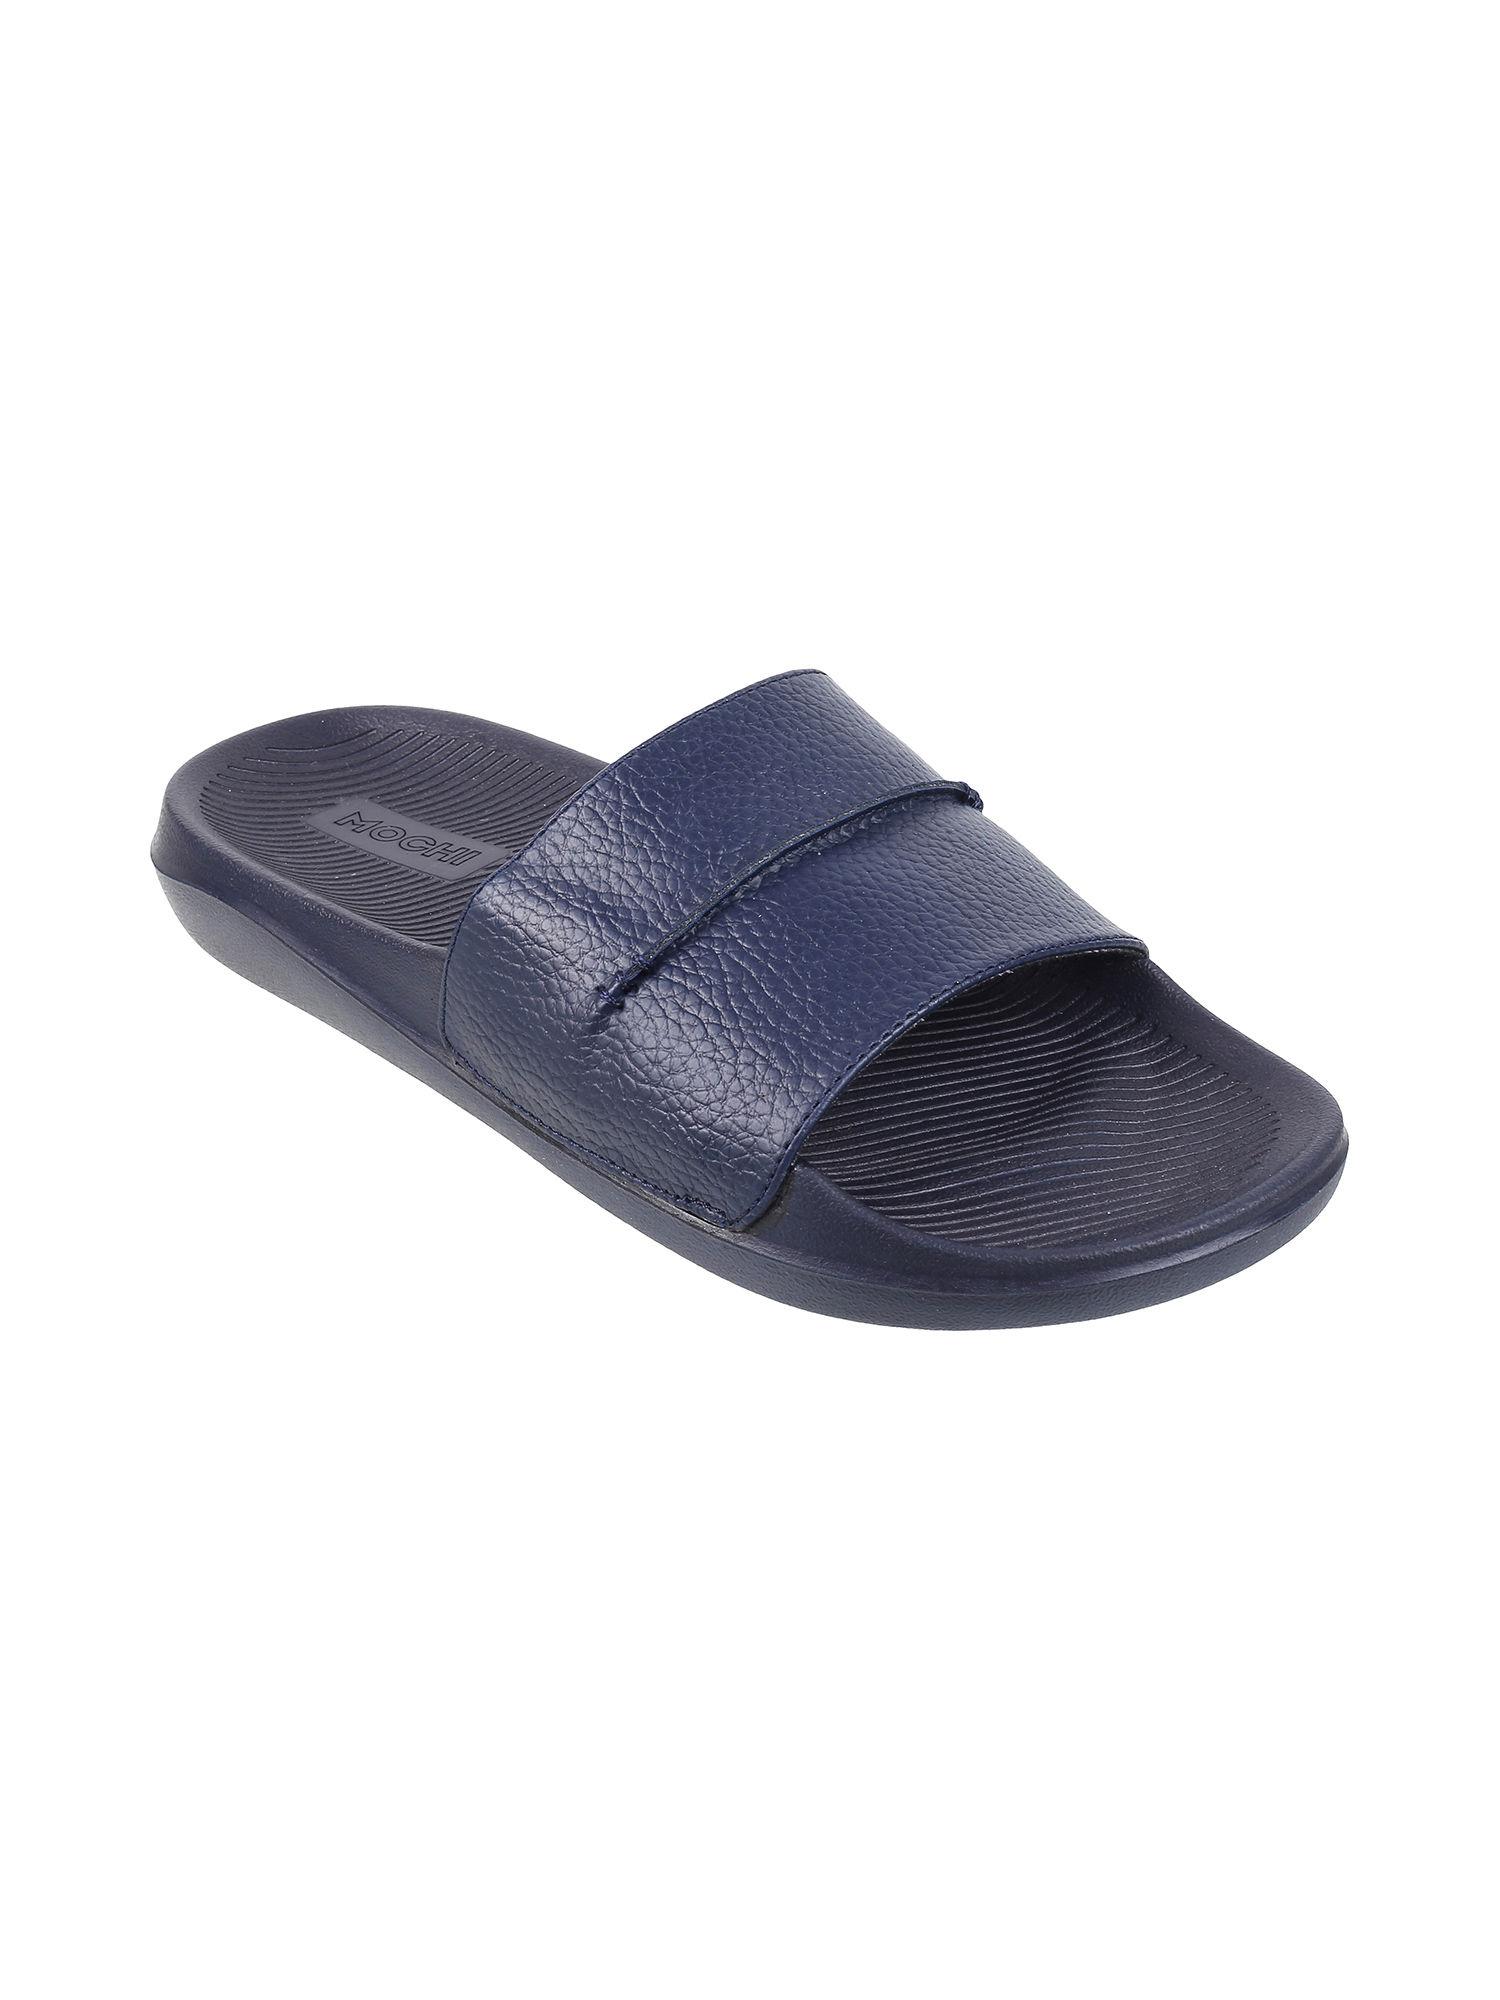 men-synthetic-blue-textured-sliders